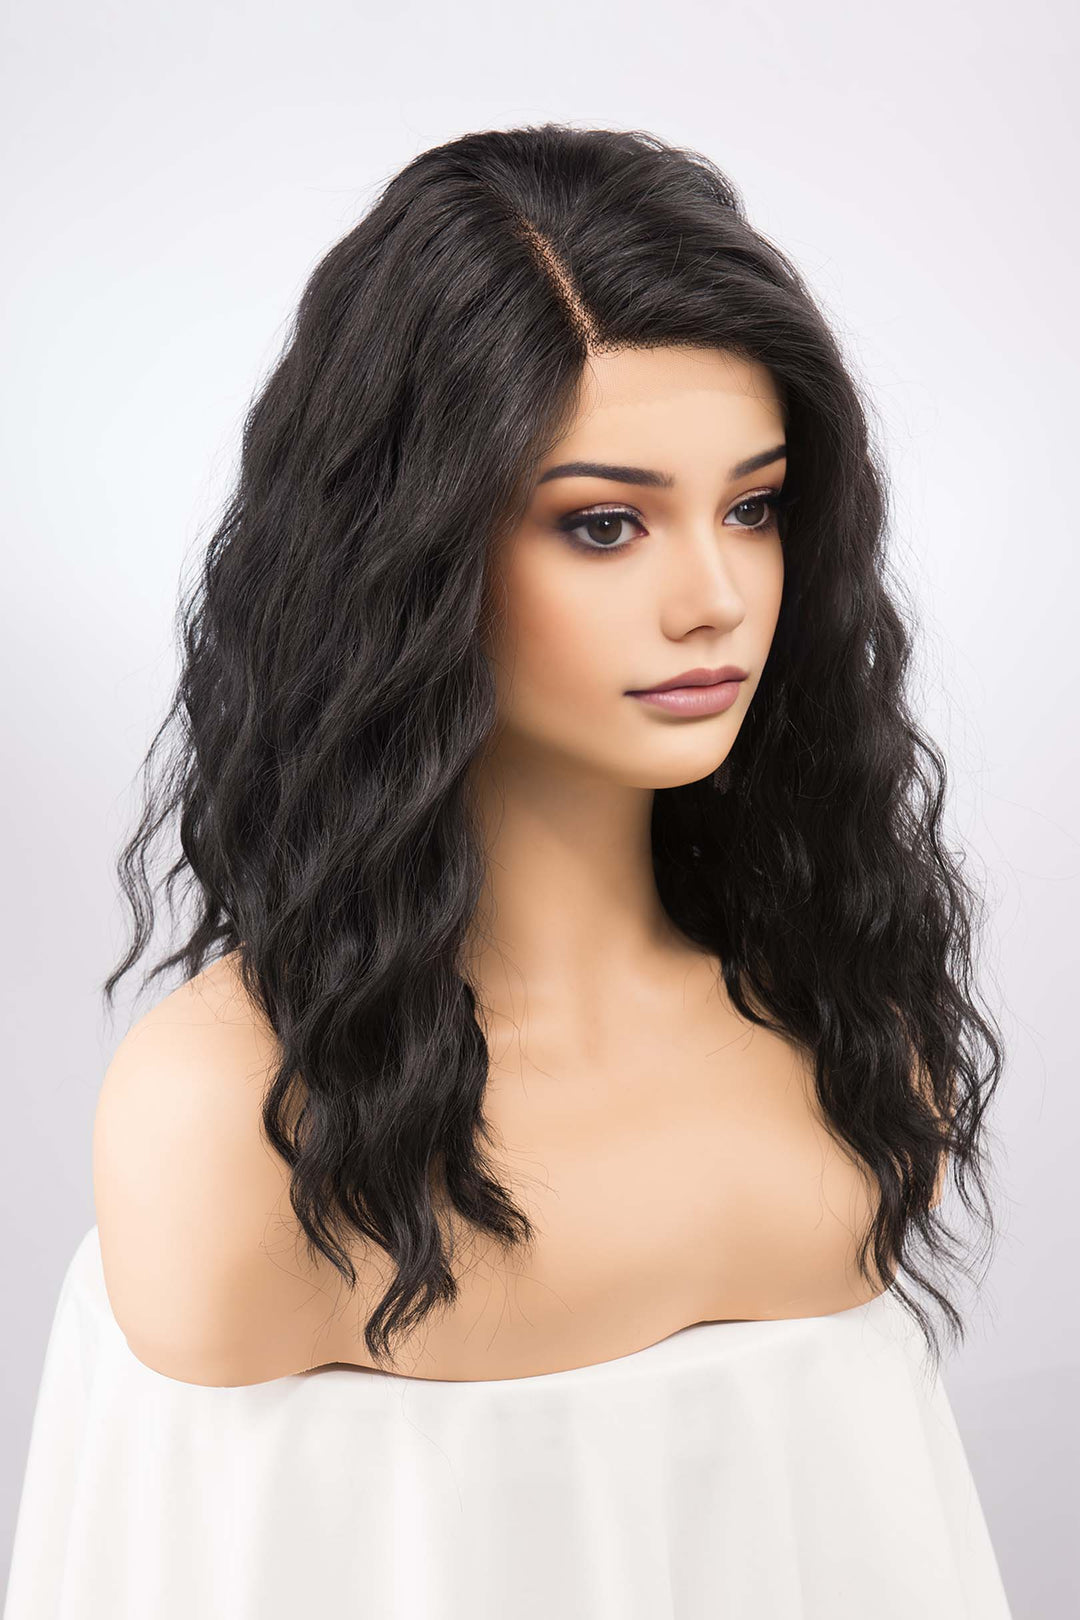 Natural Black Wavy Wig Jet Black Lace Front Wig Beach Wavy Wig Daily Use Natural Wig Drag Queen Wig Halloween Costume Wig Micah